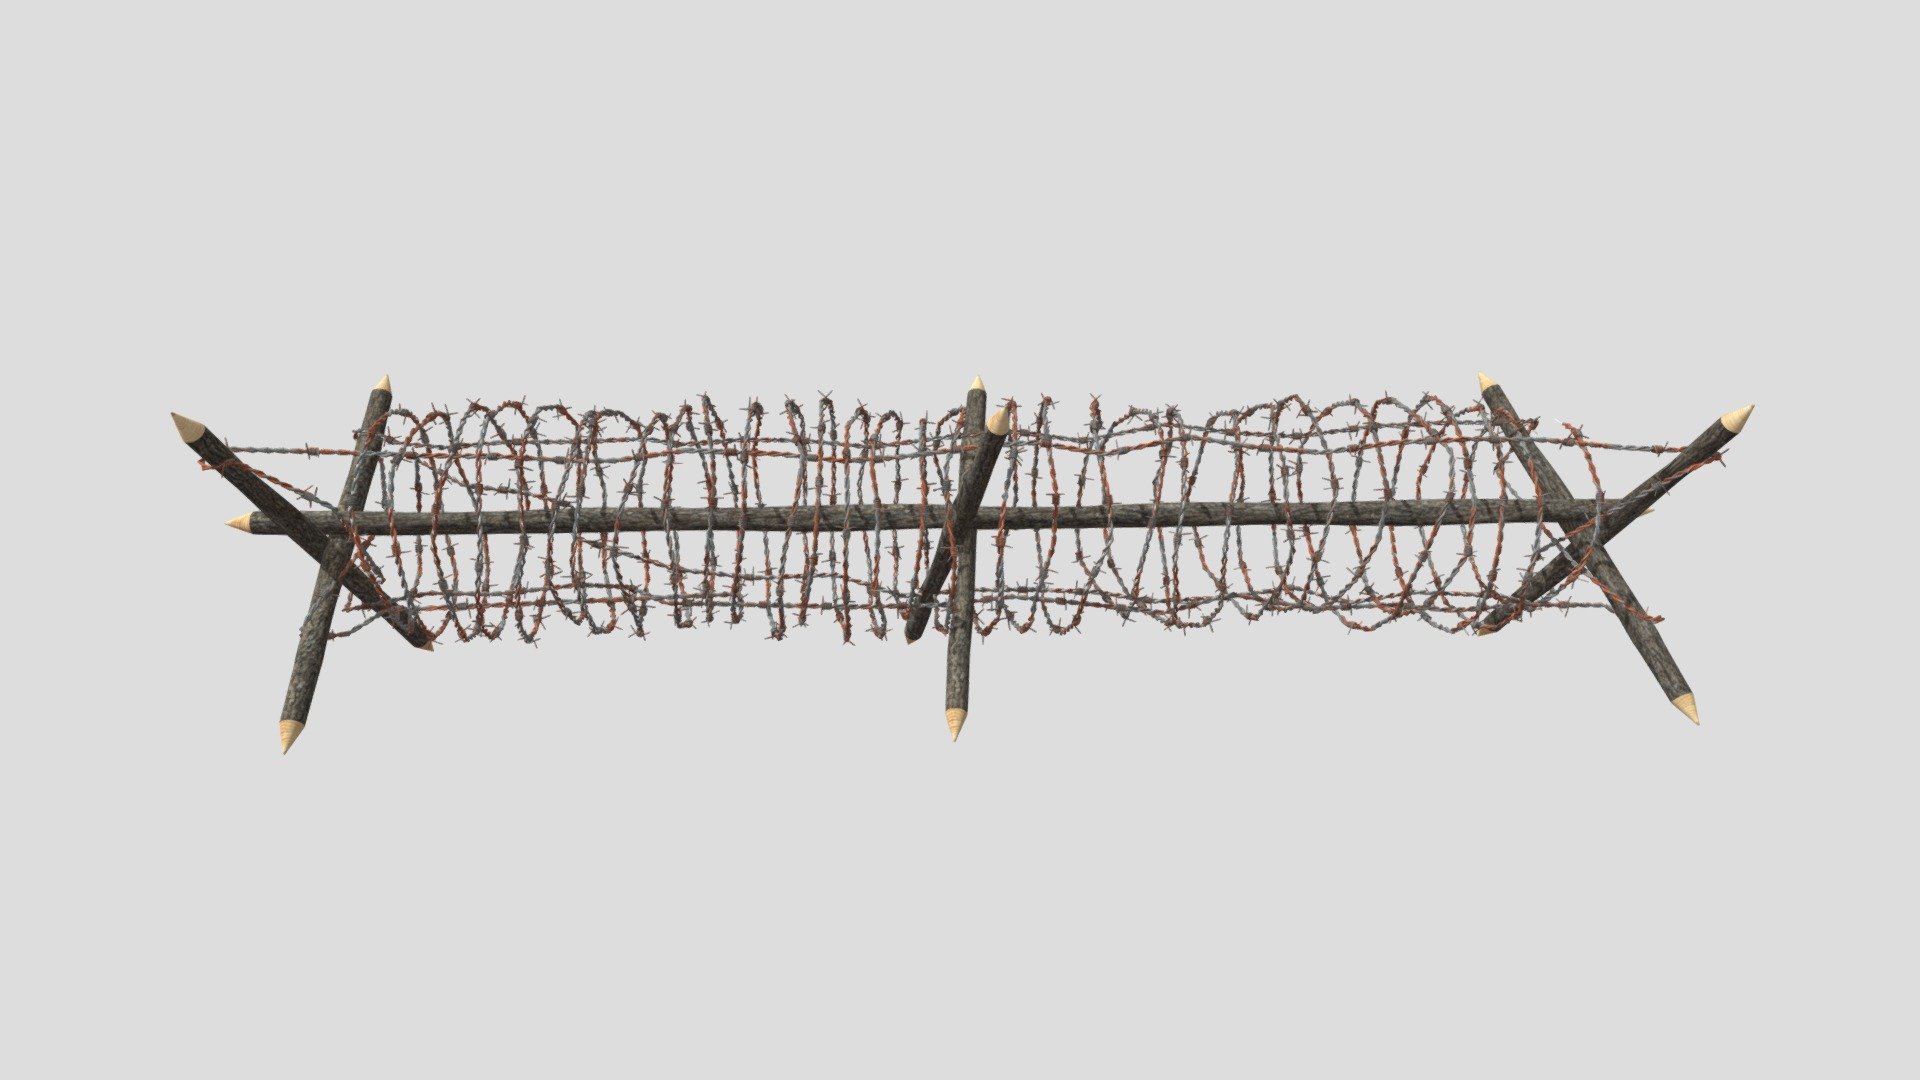 A very accurate model of a Barbed Wire Obstacle.

The model comes in five formats:
-.blend, rendered with cycles, as seen in the images;
-.obj, with materials applied and textures;
-.dae, with materials applied and textures;
-.fbx, with material slots applied;
-.stl;

Depending on the 3D Software program used, slight material tweaking might be needed.
This 3d model was originally created in Blender 2.78 and rendered with Cycles.
The model has materials applied in all formats, and are ready to import and render.
The model is built strictly out of quads and is subdivisable.

For any problems please feel free to contact me.

Don't forget to rate and enjoy! - Barb Wire Obstacle 3 - Buy Royalty Free 3D model by dragosburian 3d model